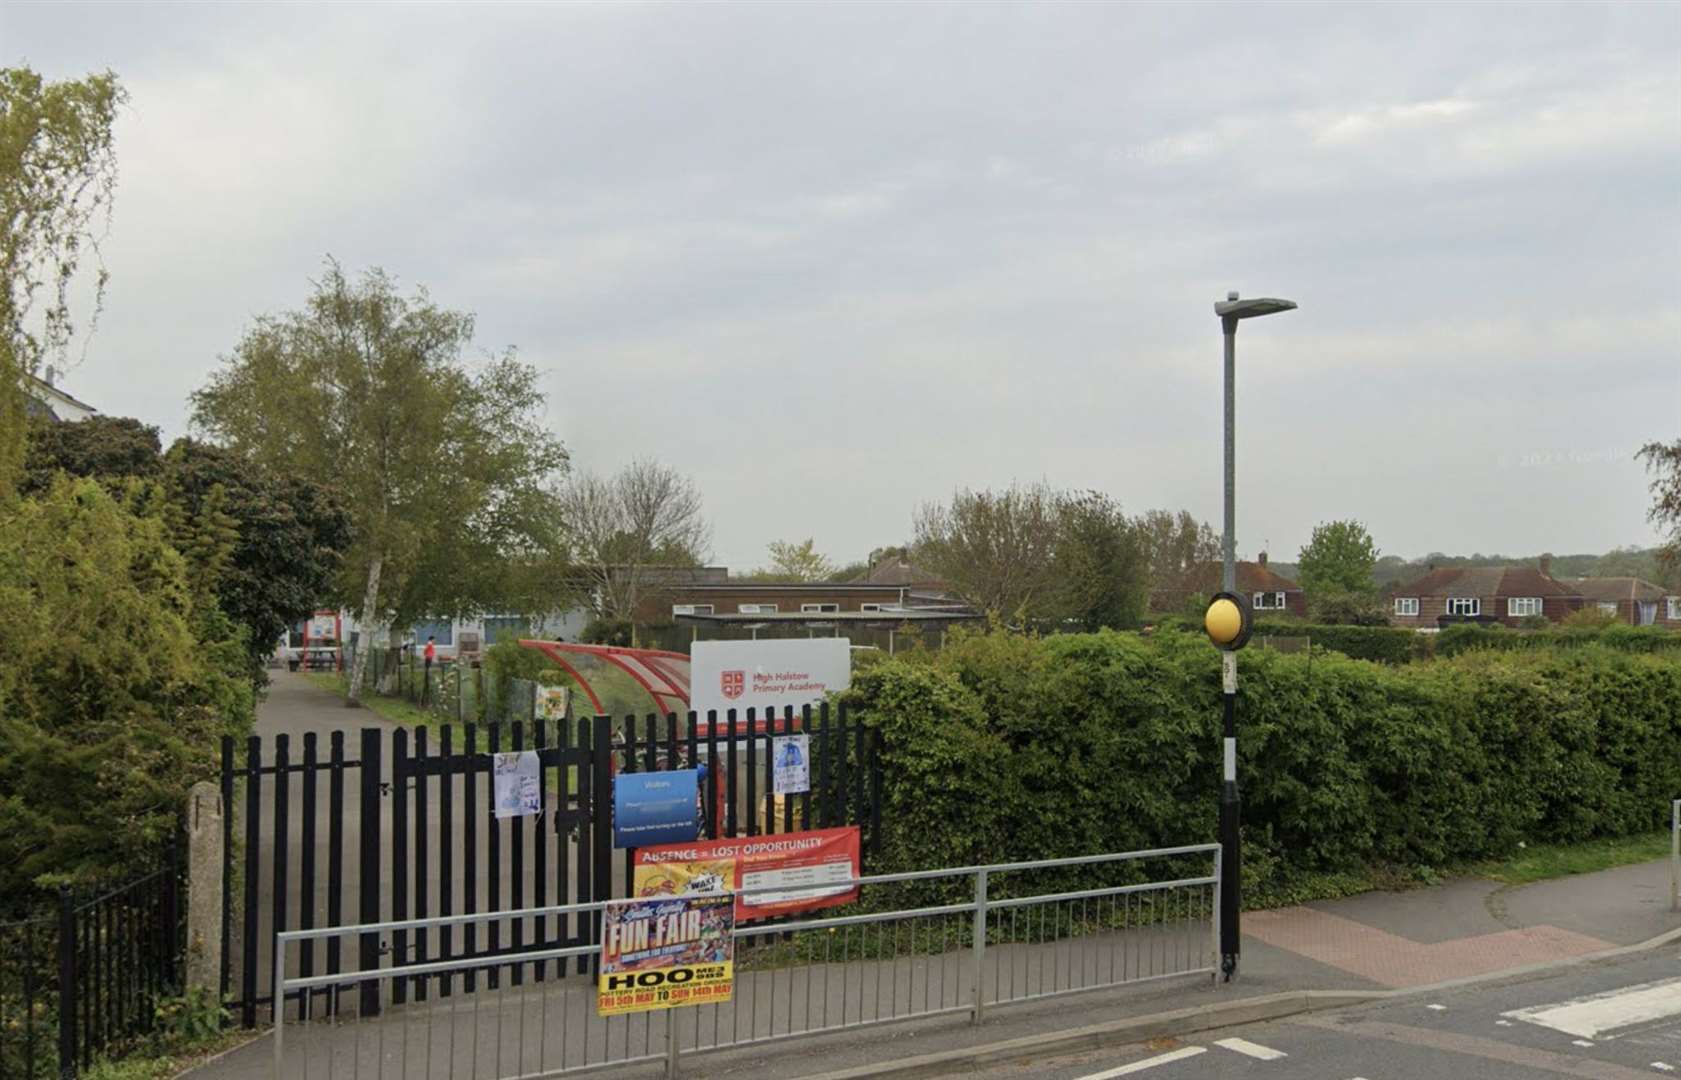 High Halstow Primary Academy has been rated ‘outstanding’ by Ofsted. Picture: Google Maps